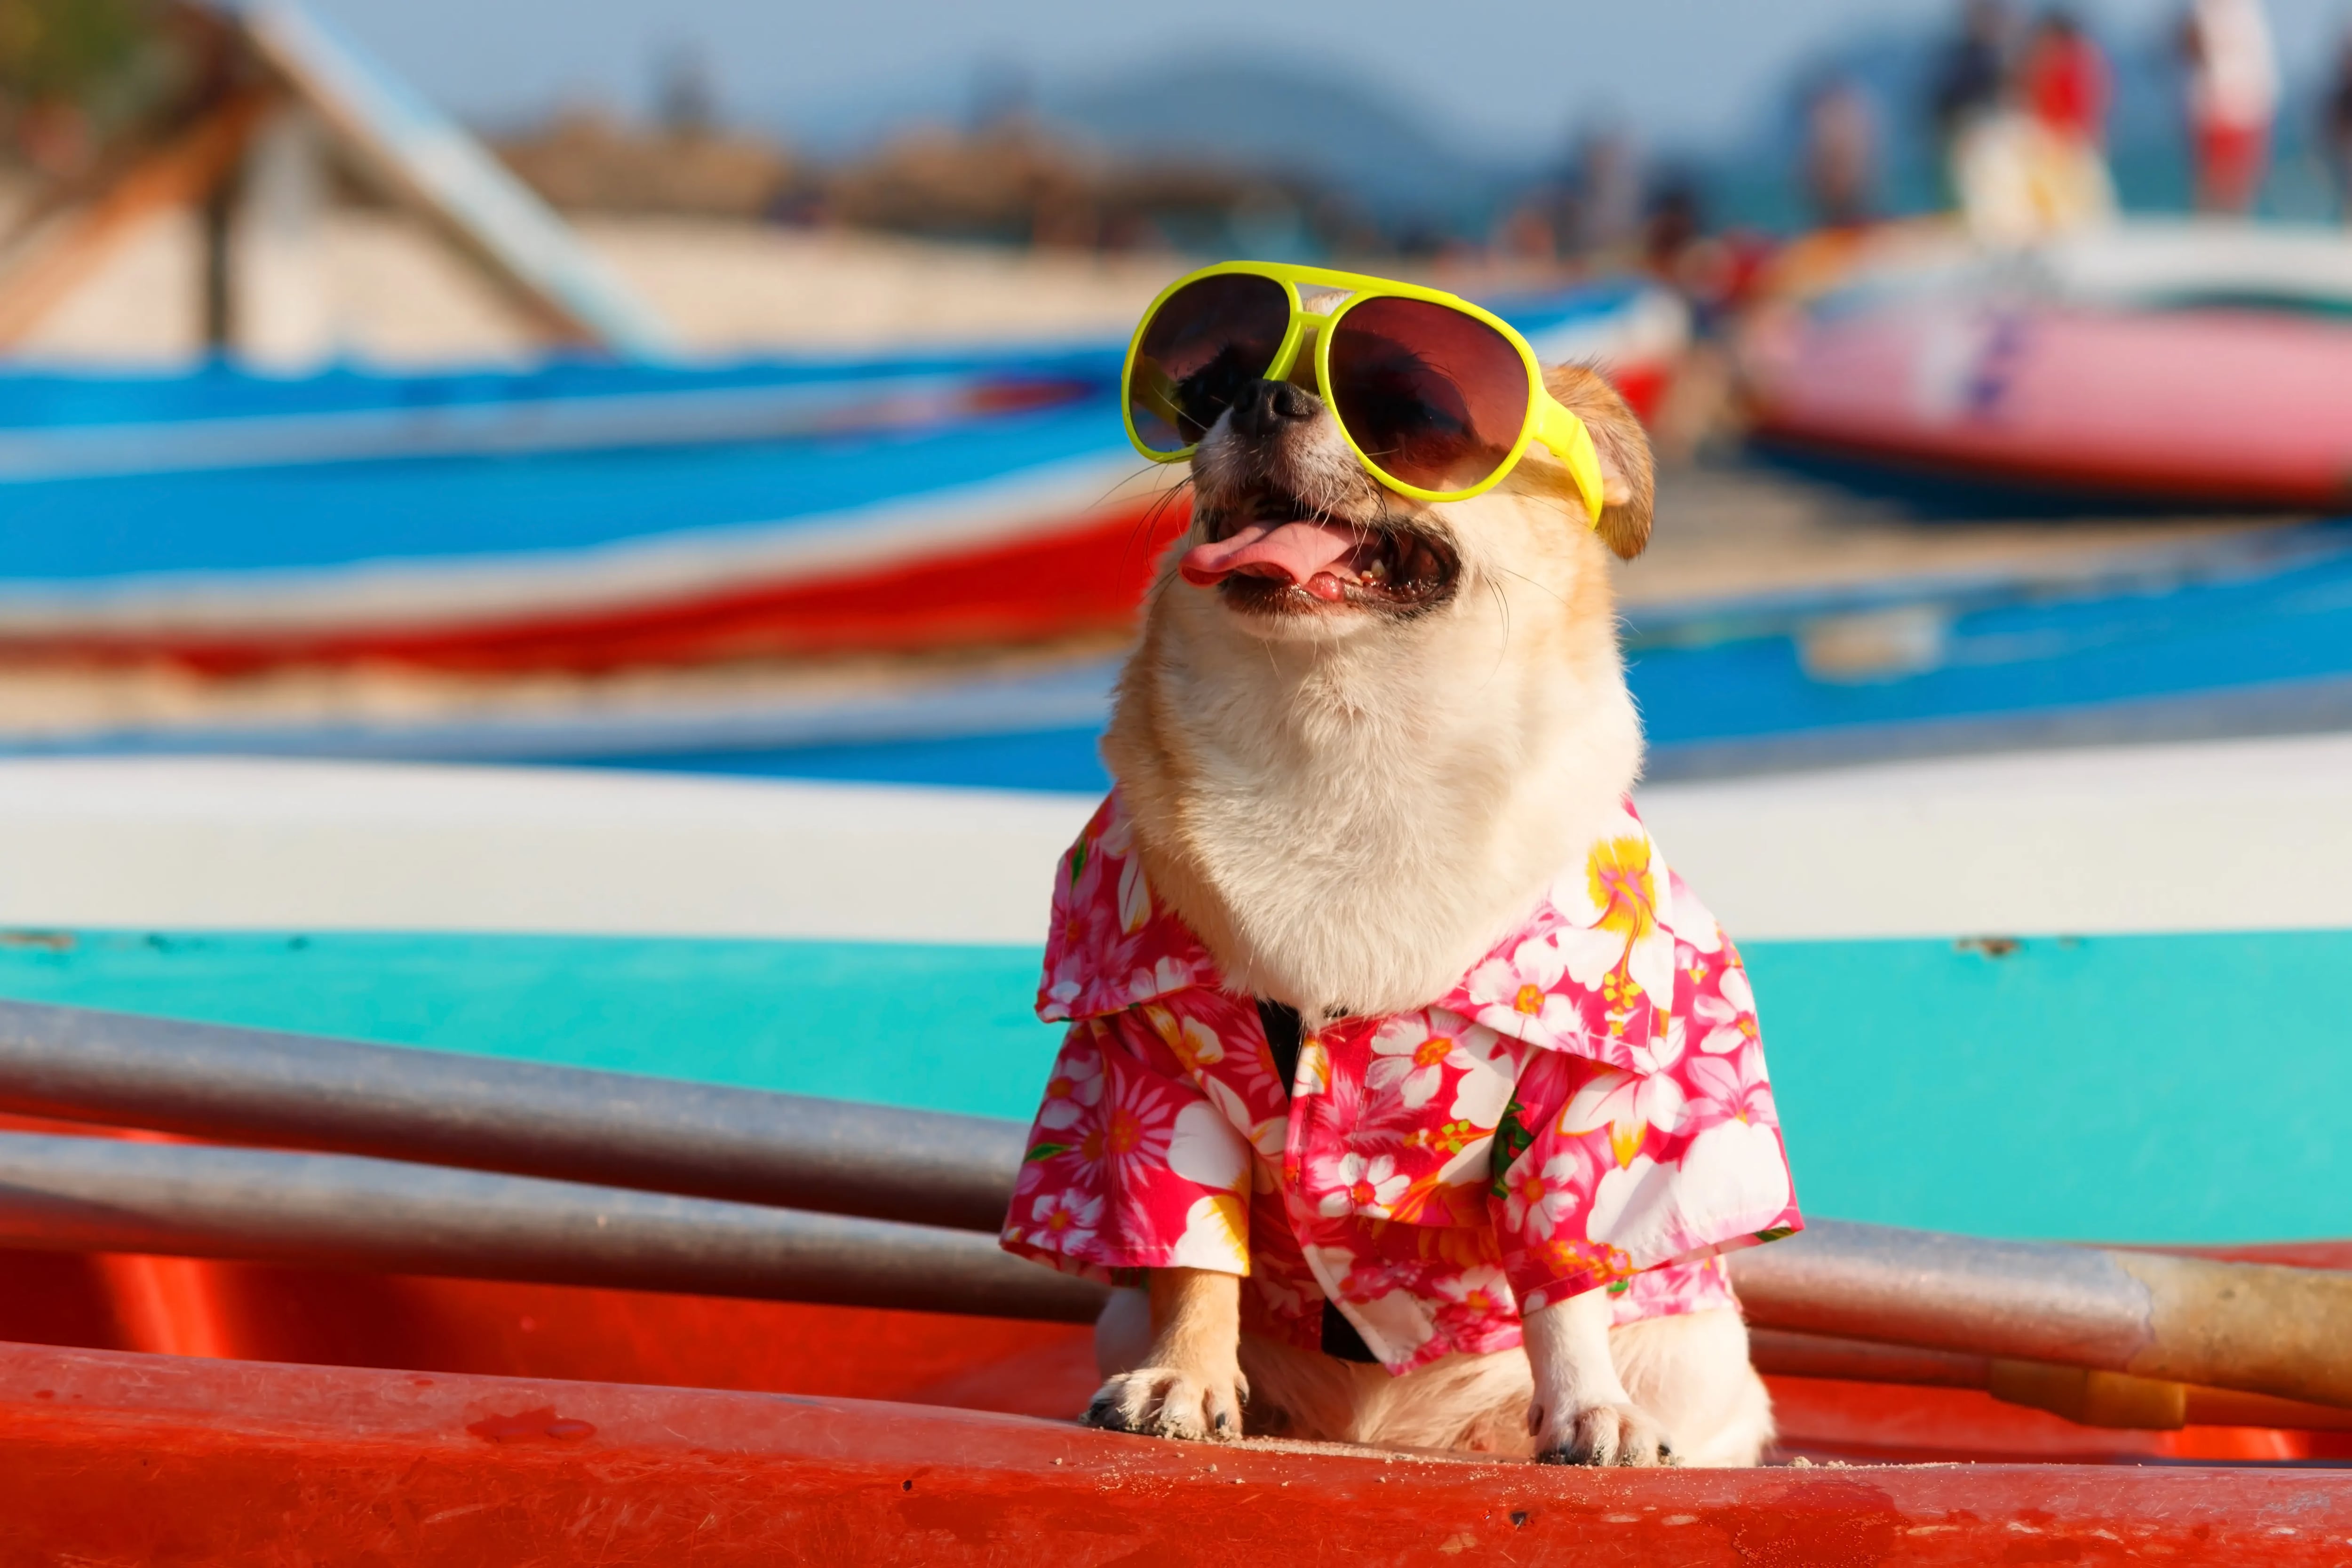 Chihuahua wearing pink flower shirt and sunglasses on the beach.